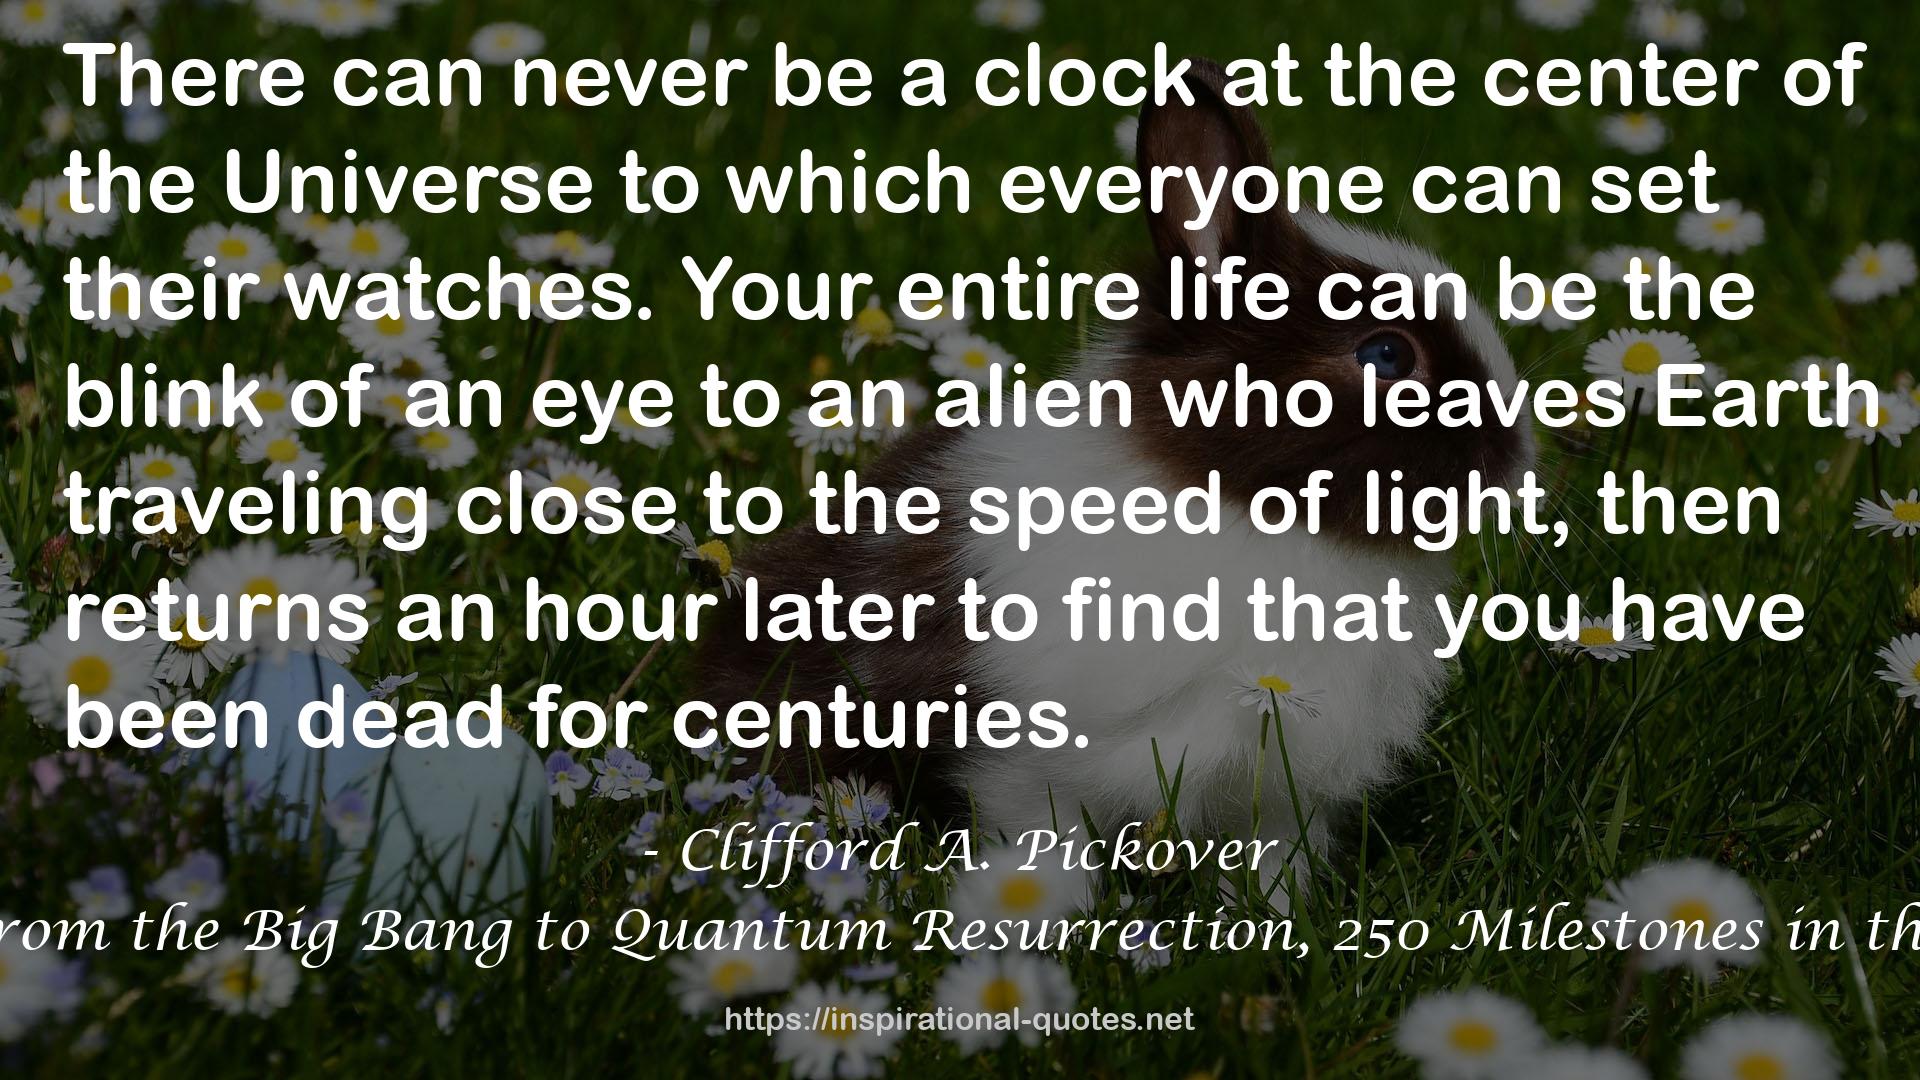 Clifford A. Pickover QUOTES